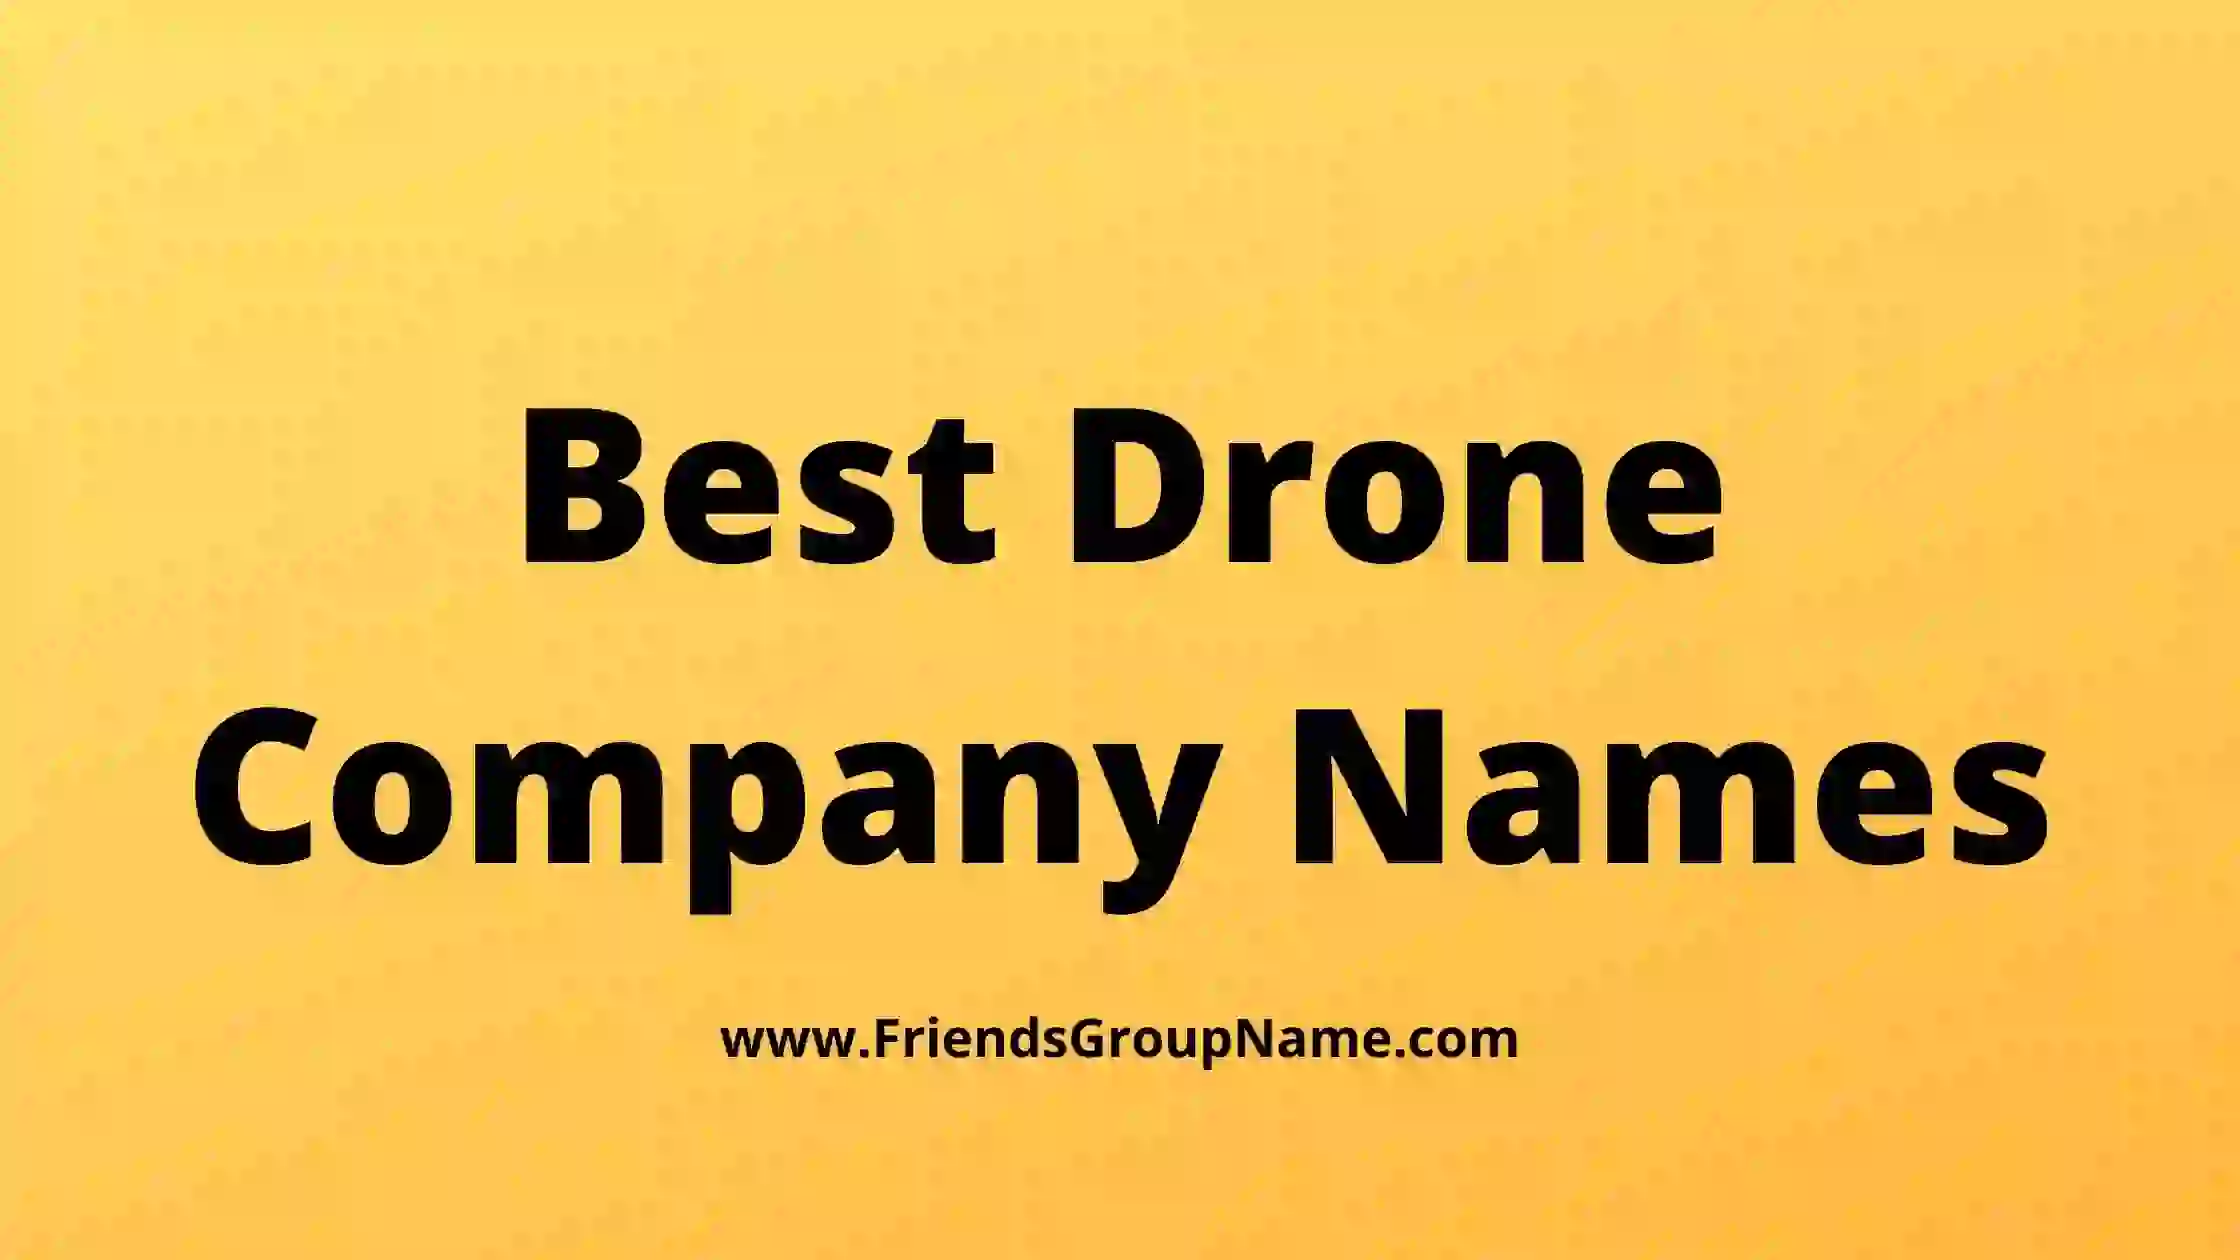 Best Drone Company Names